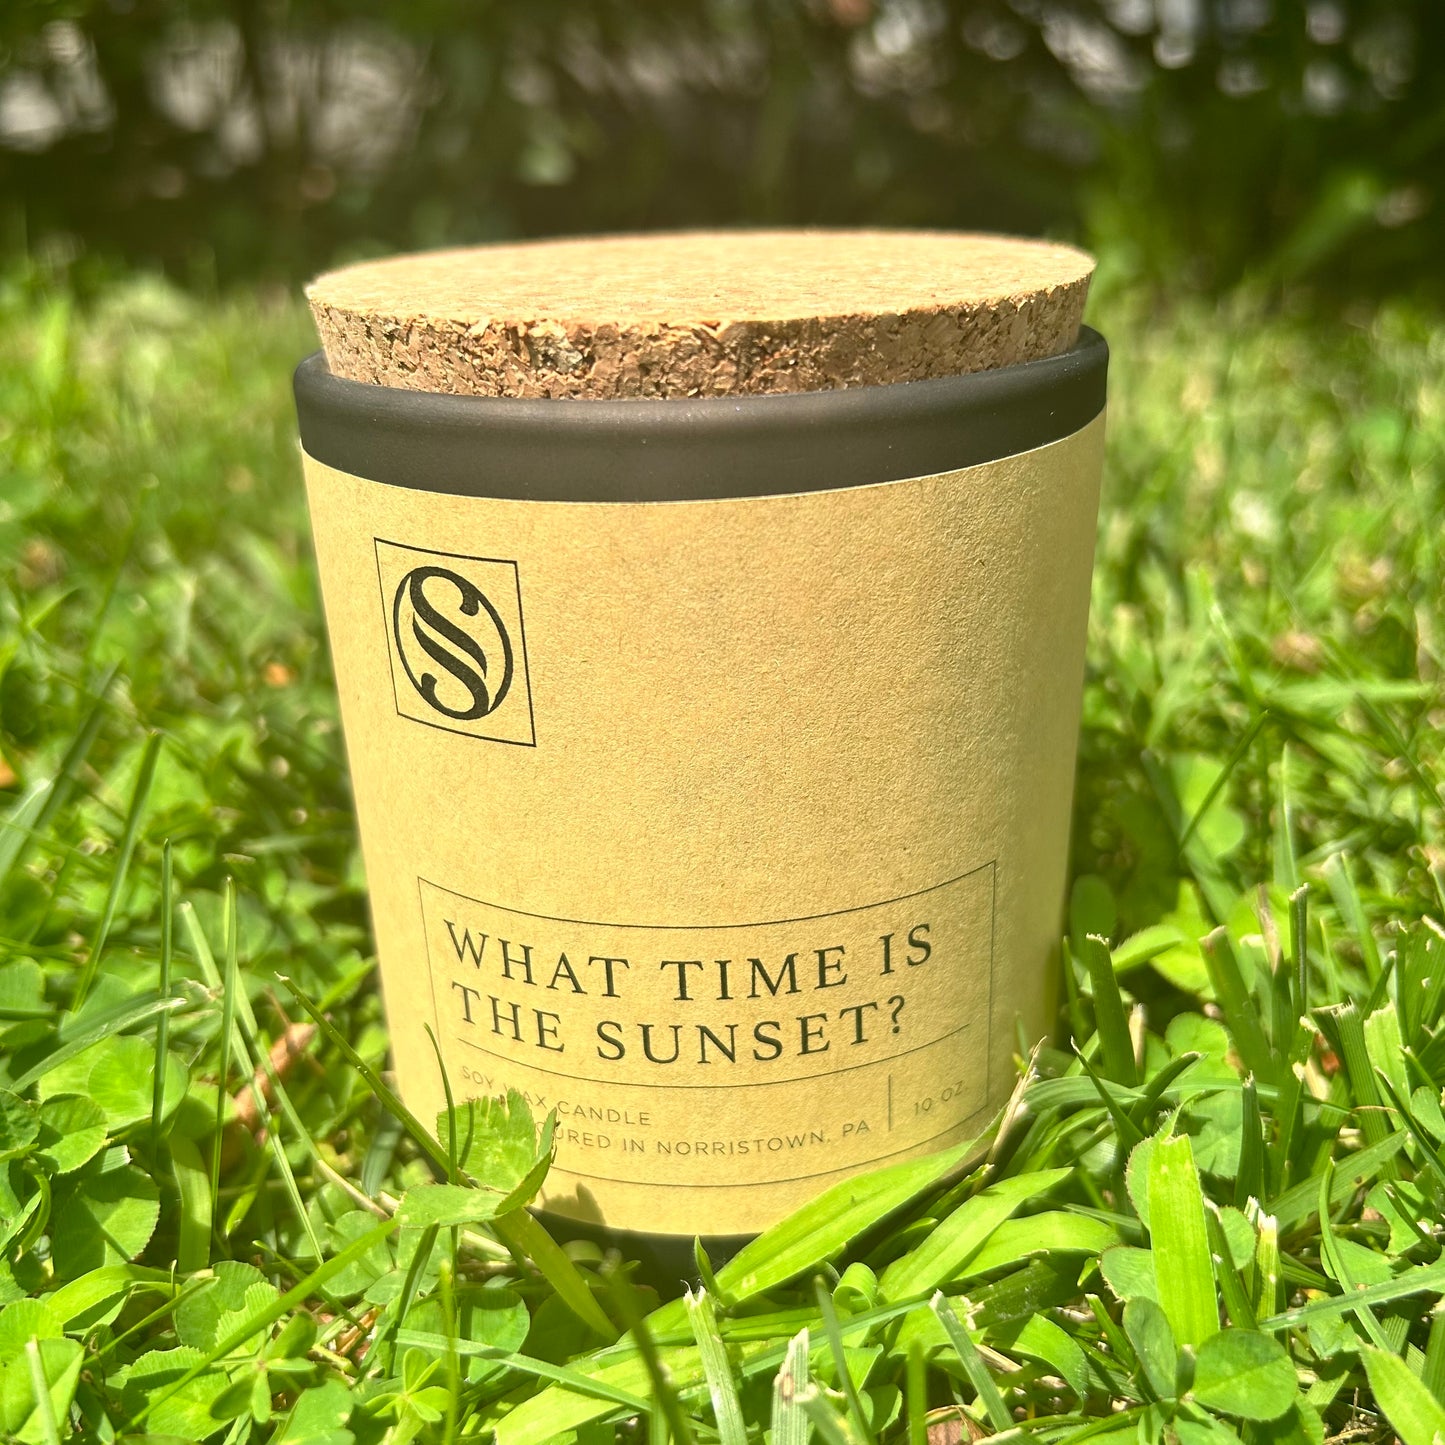 What Time is the Sunset?